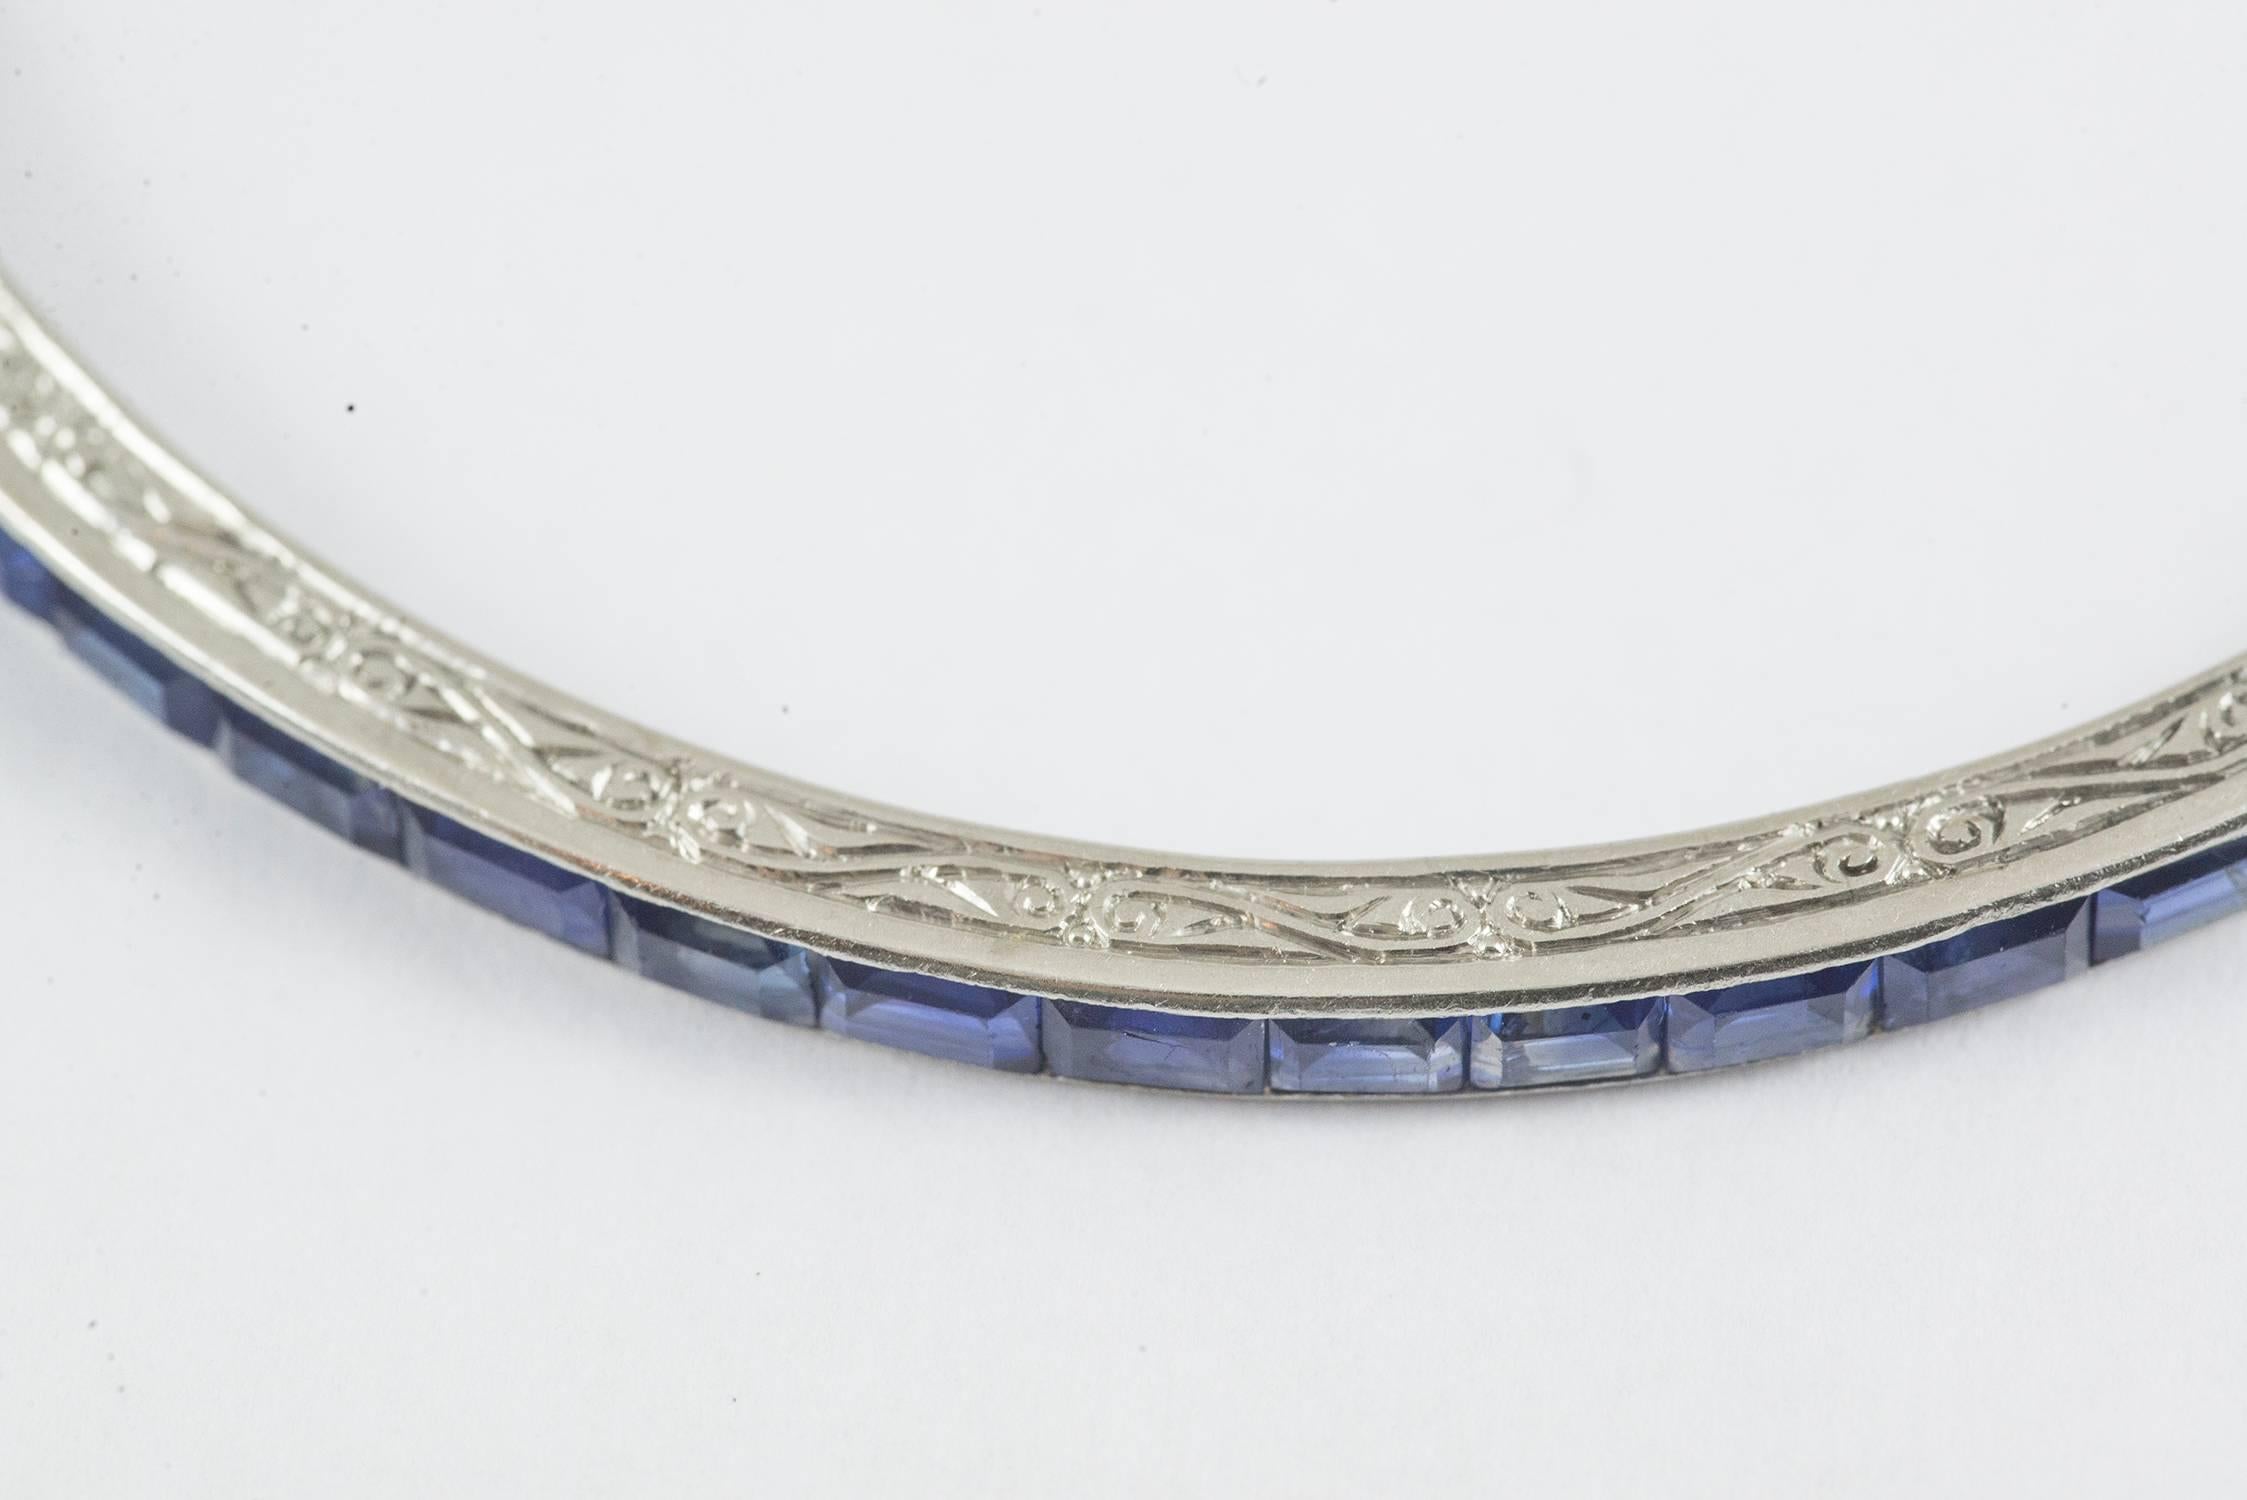 A rare Art Deco bangle set in platinum with 55 rectangular step cut blue sapphires. This bangle is beautifully made with fine hand engraved scrolls carved into the platinum frame. The diameter is 2.5 inches and the interior circumference is 7.5